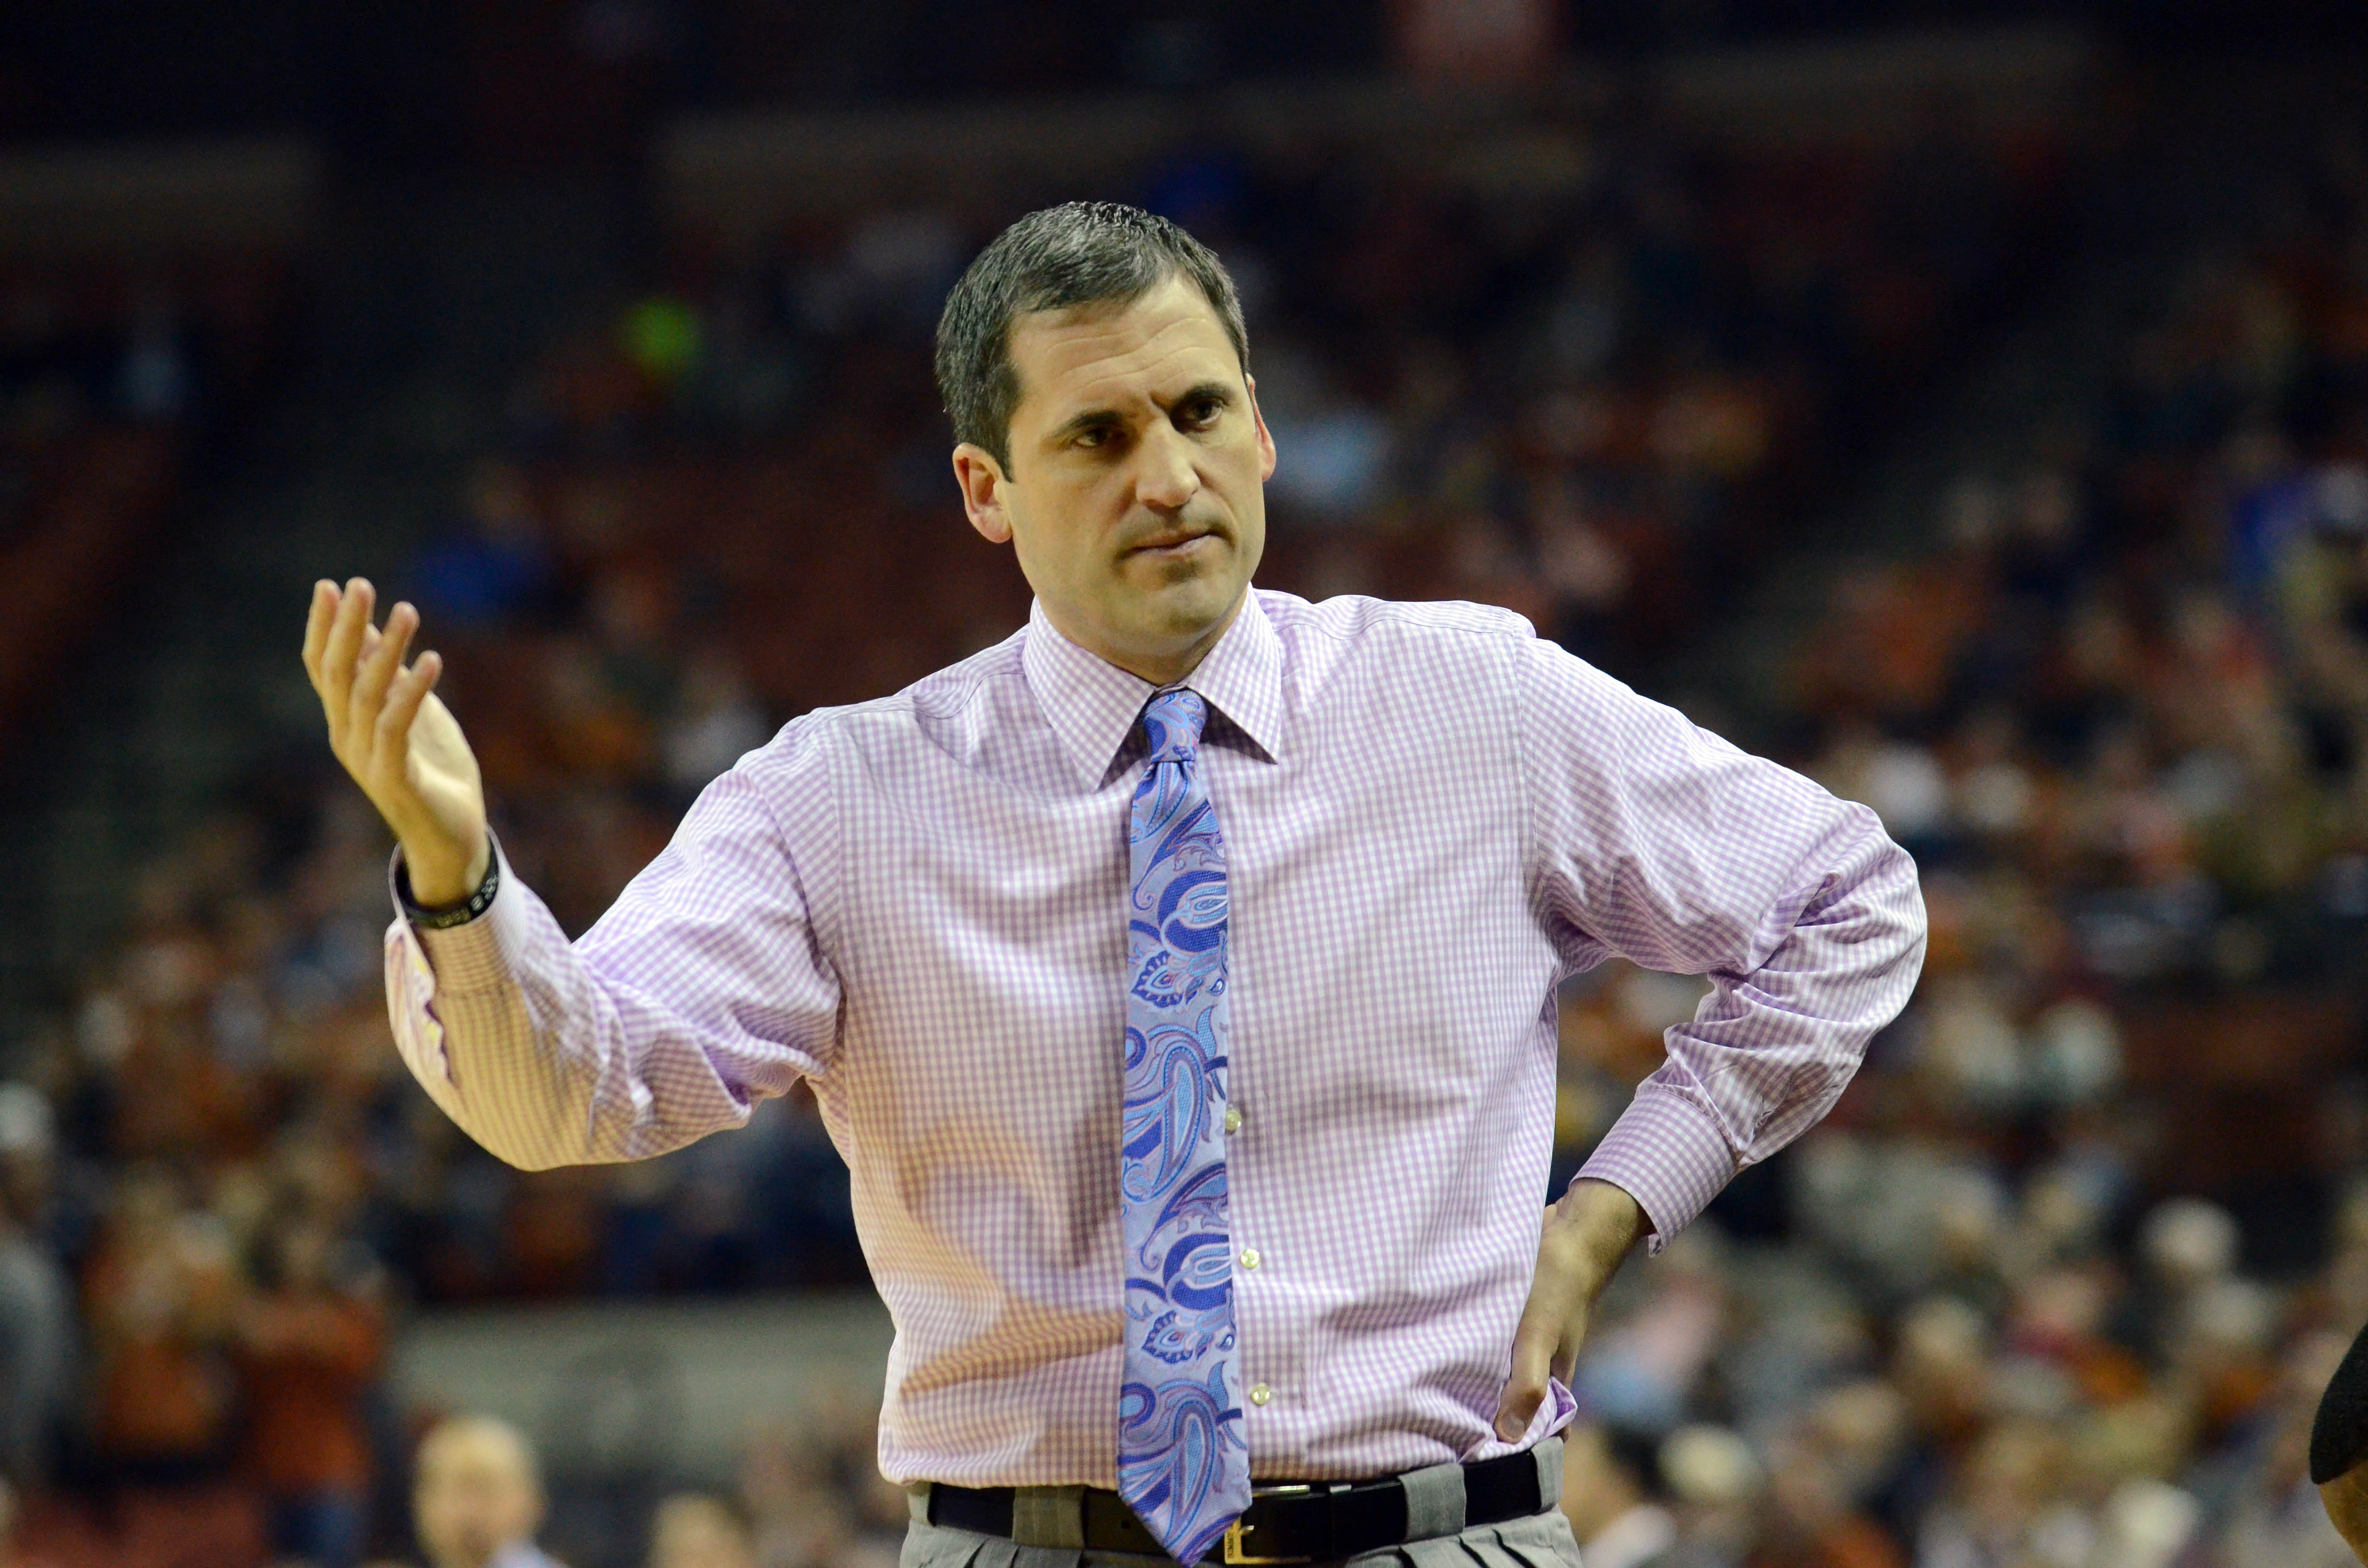 Steve Prohm totally looks like that one guy who played that one cop on that one show.